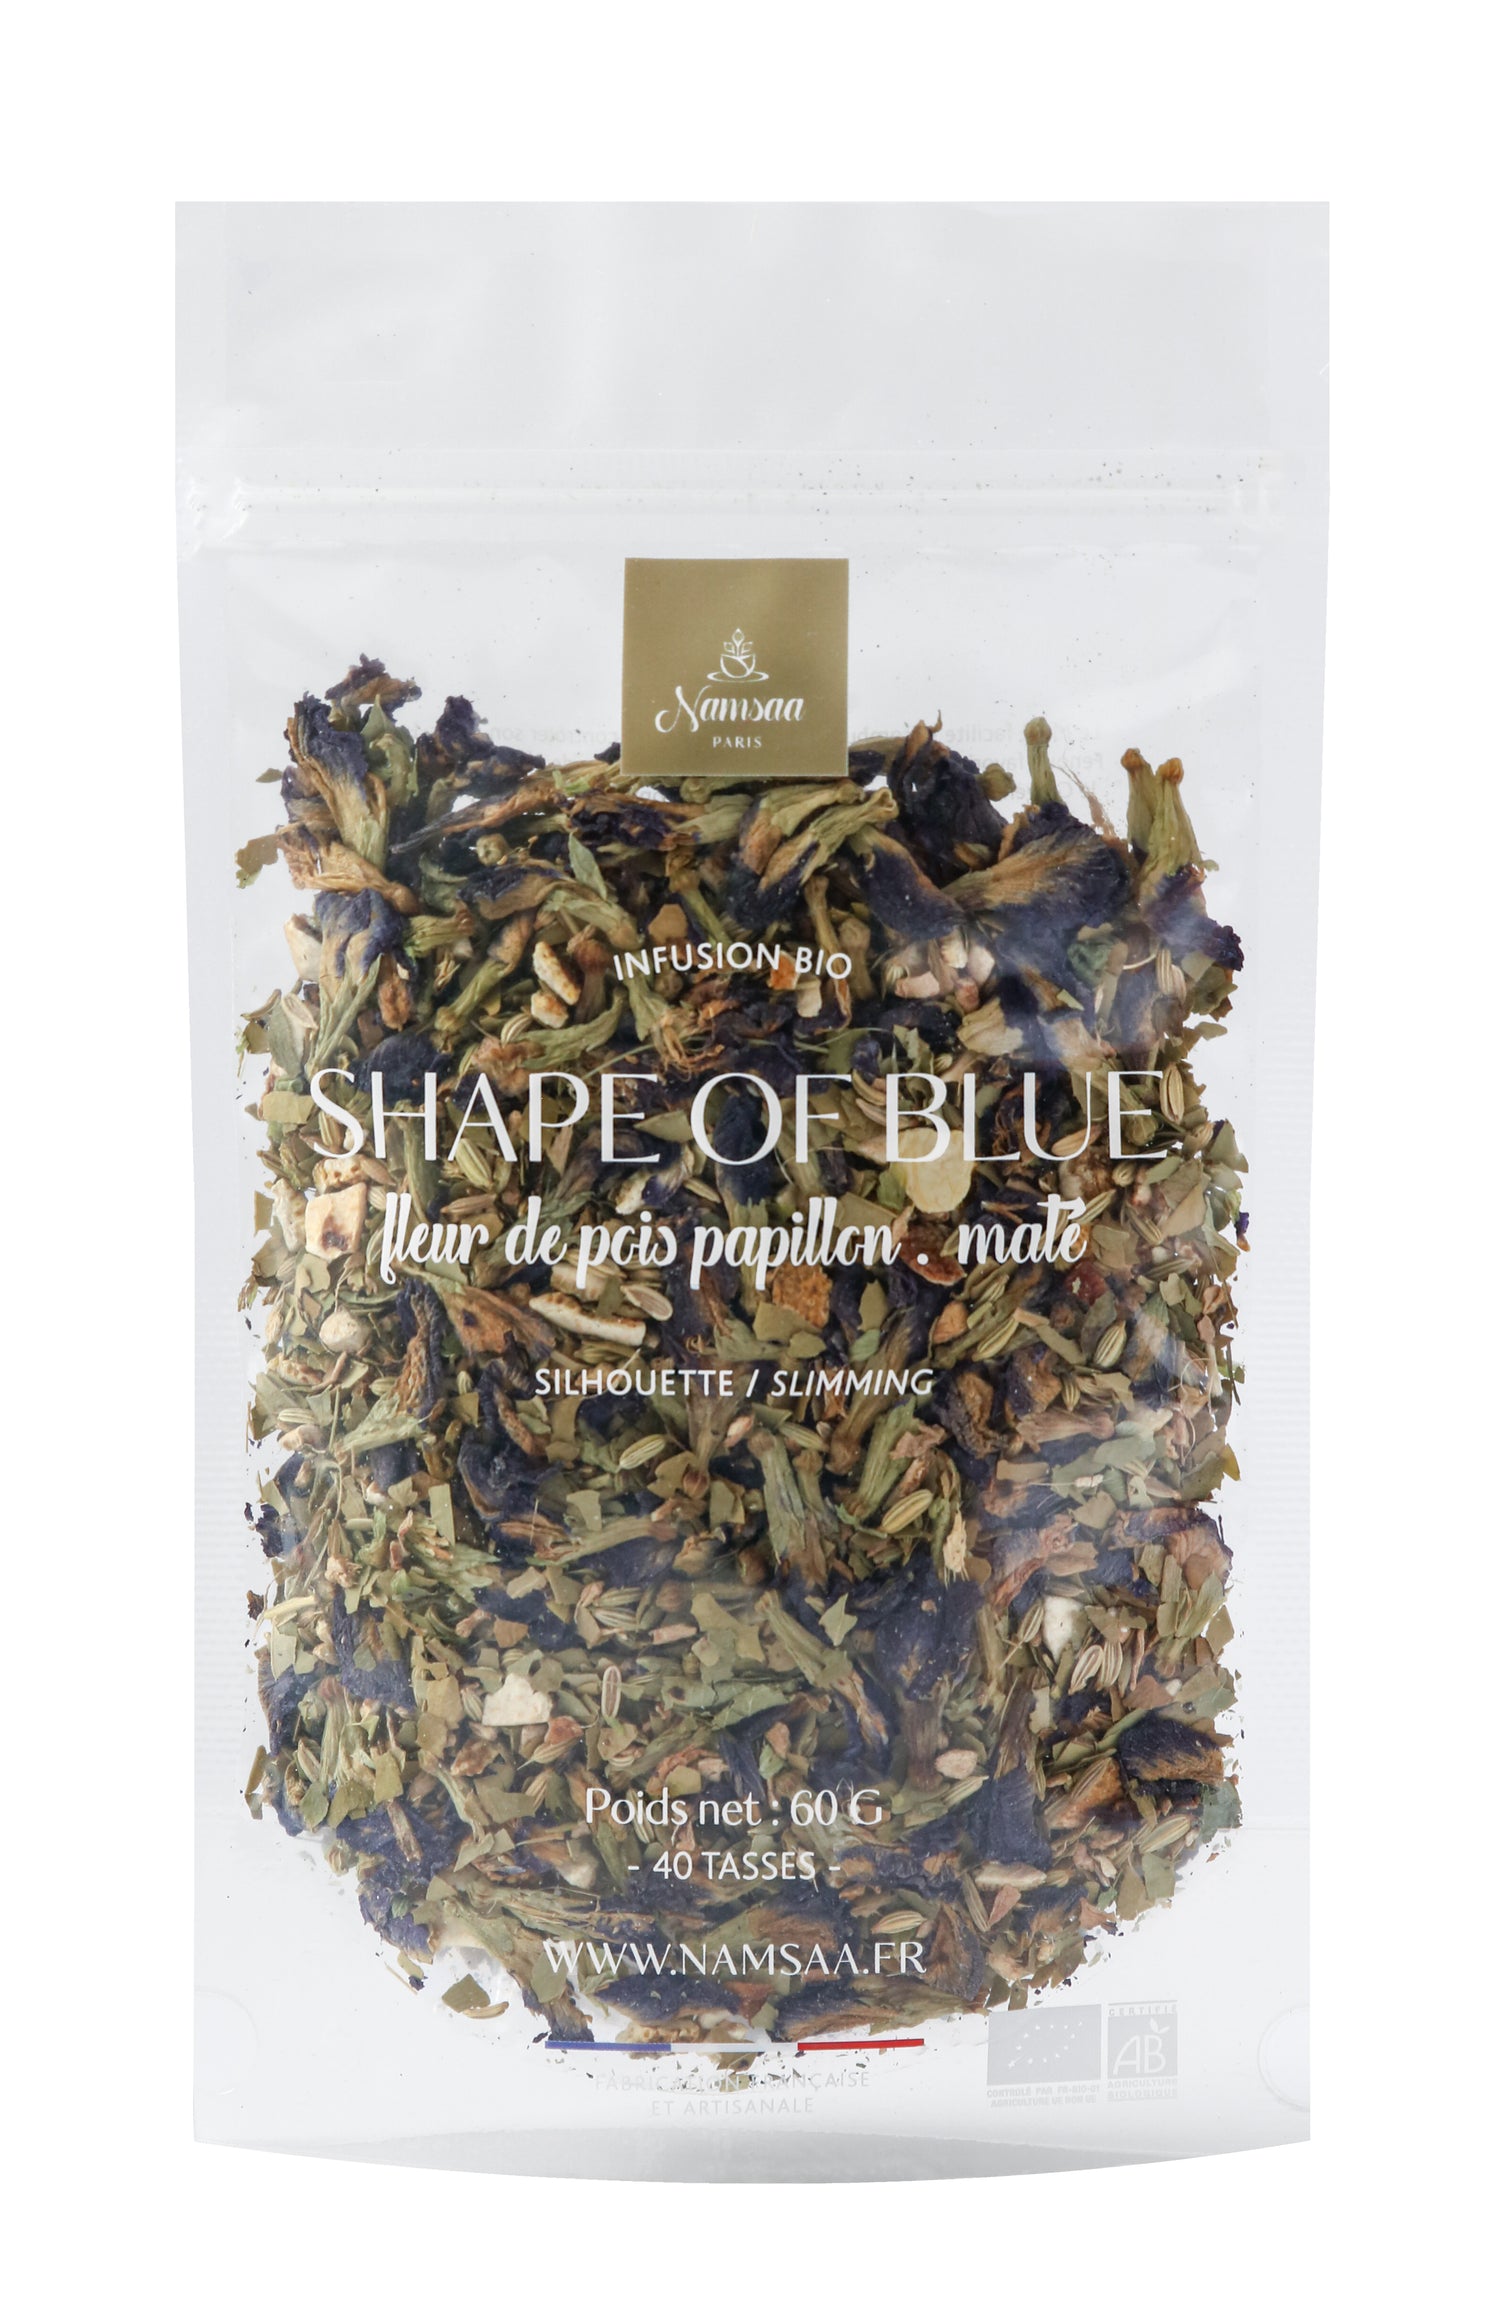 Shape of blue - silhouette infusion (box)